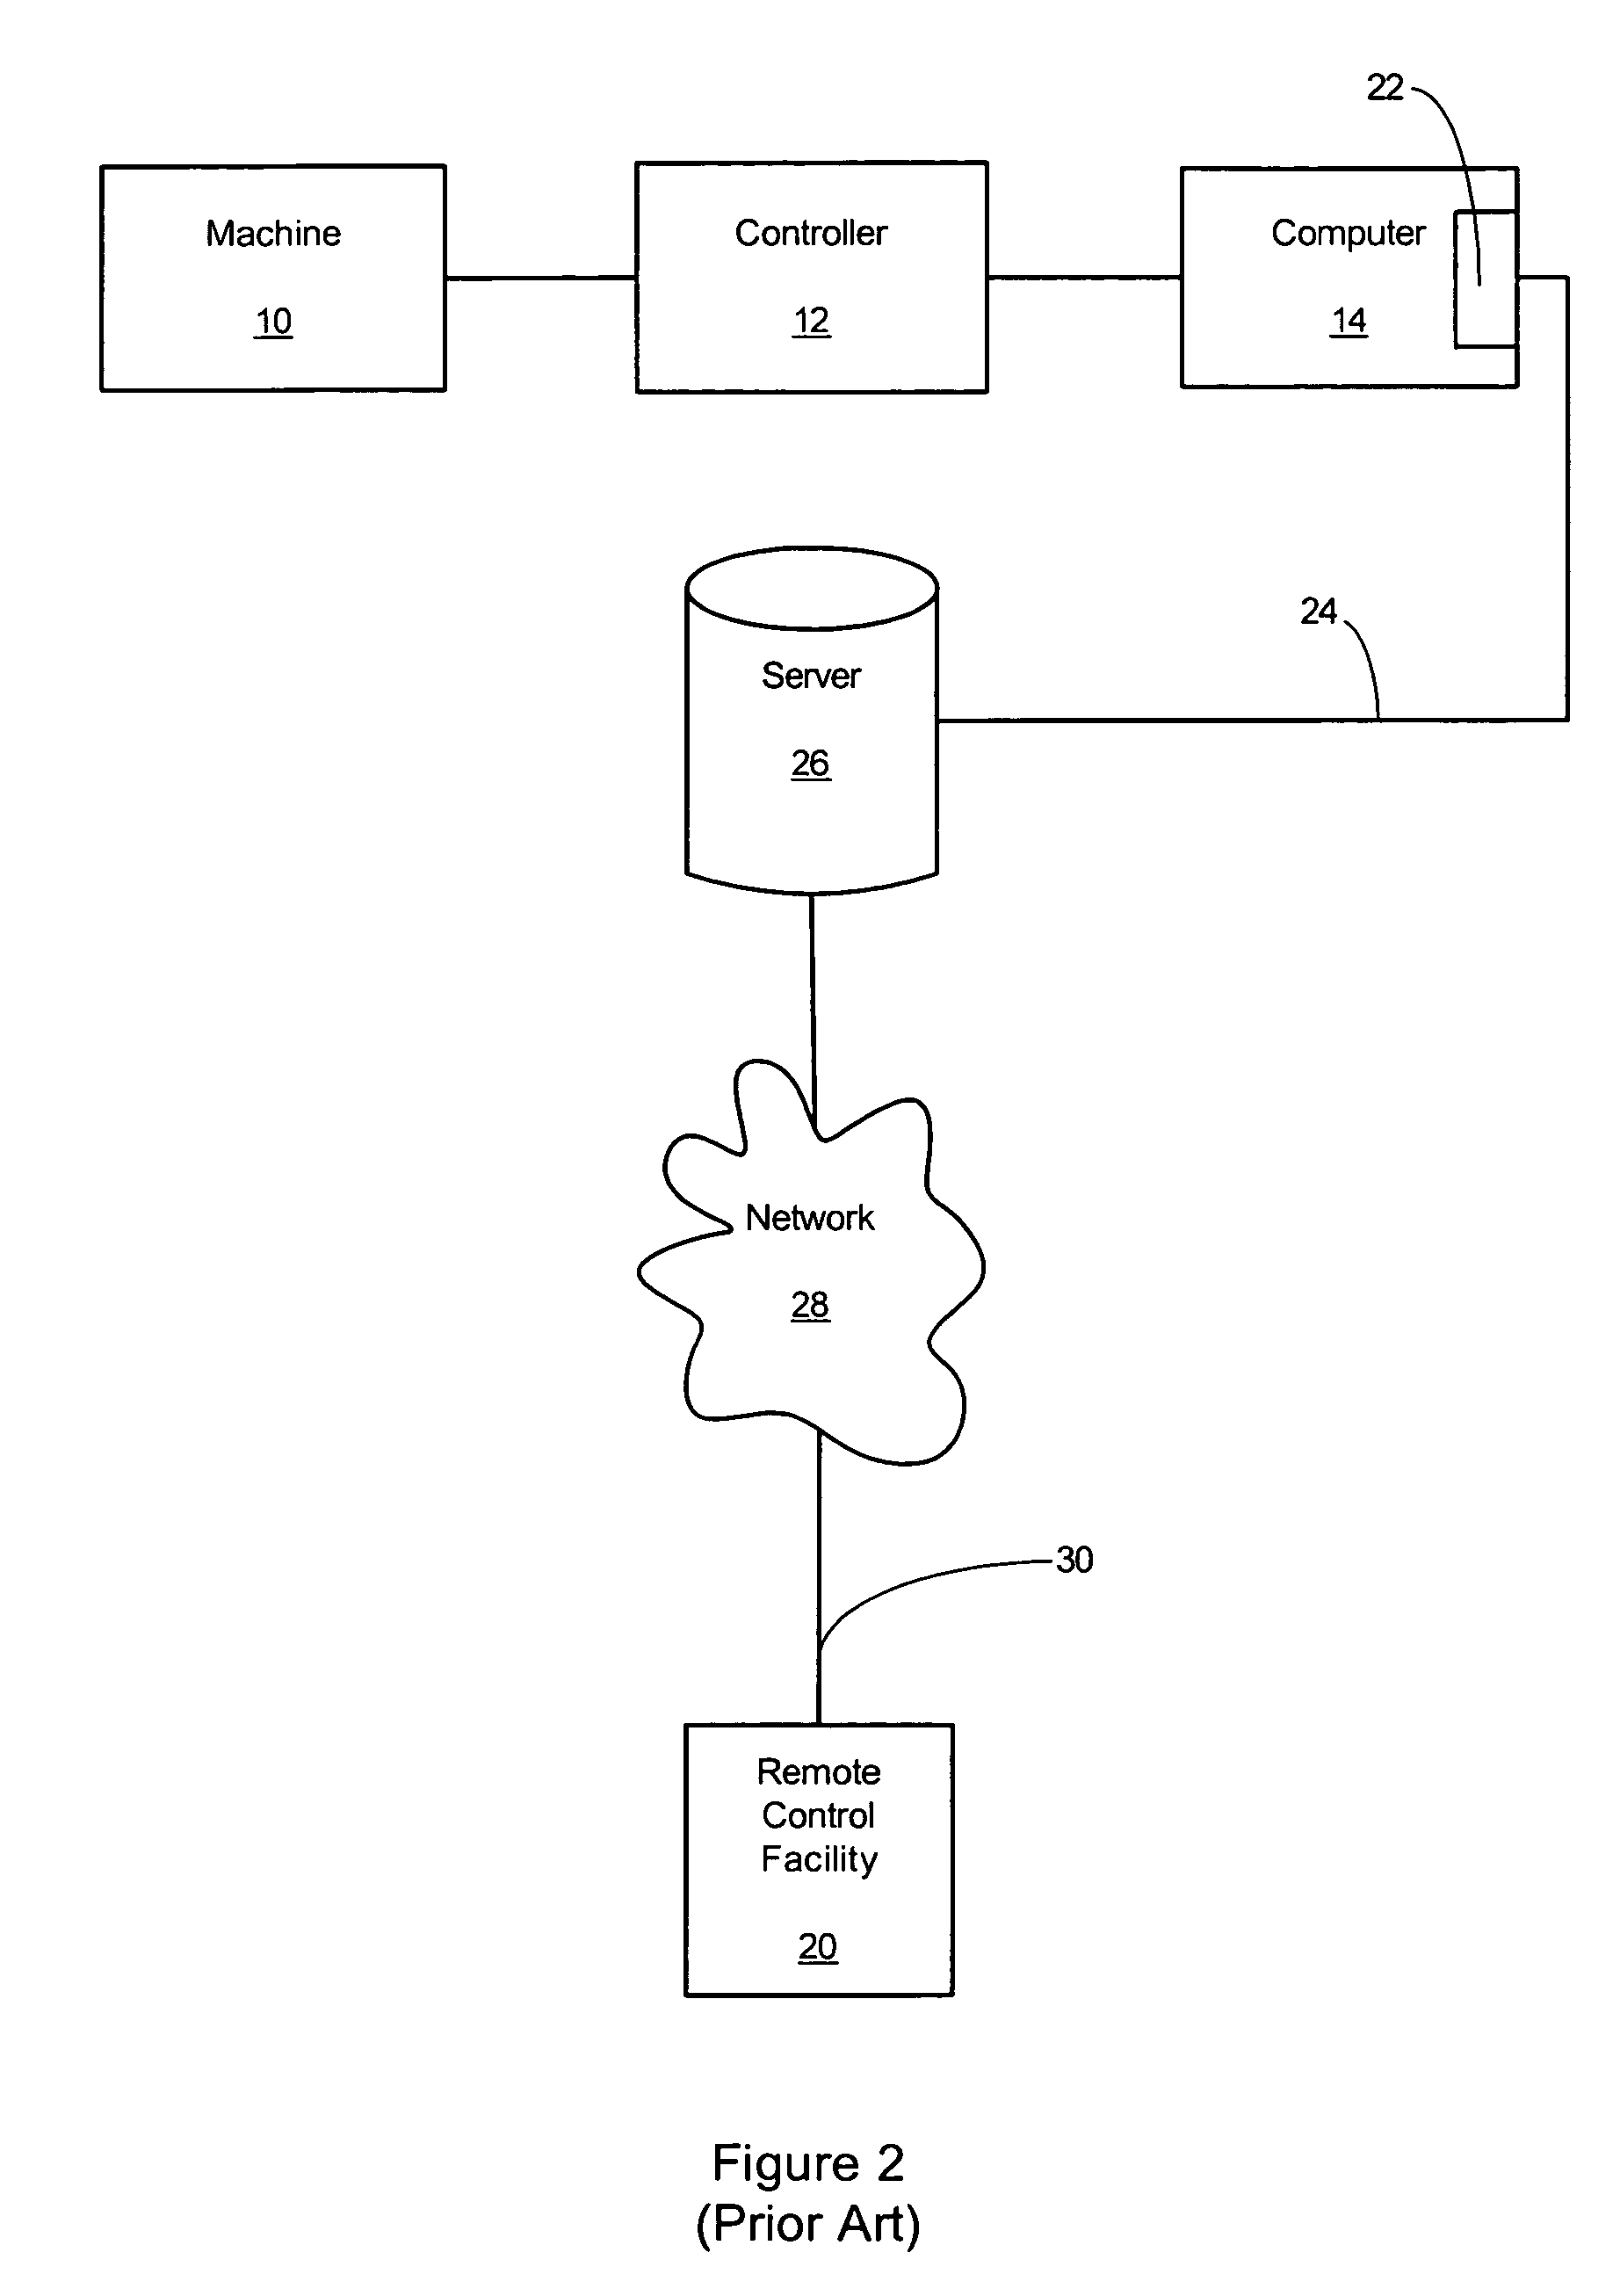 Human-machine interface system and method for remotely monitoring and controlling a machine